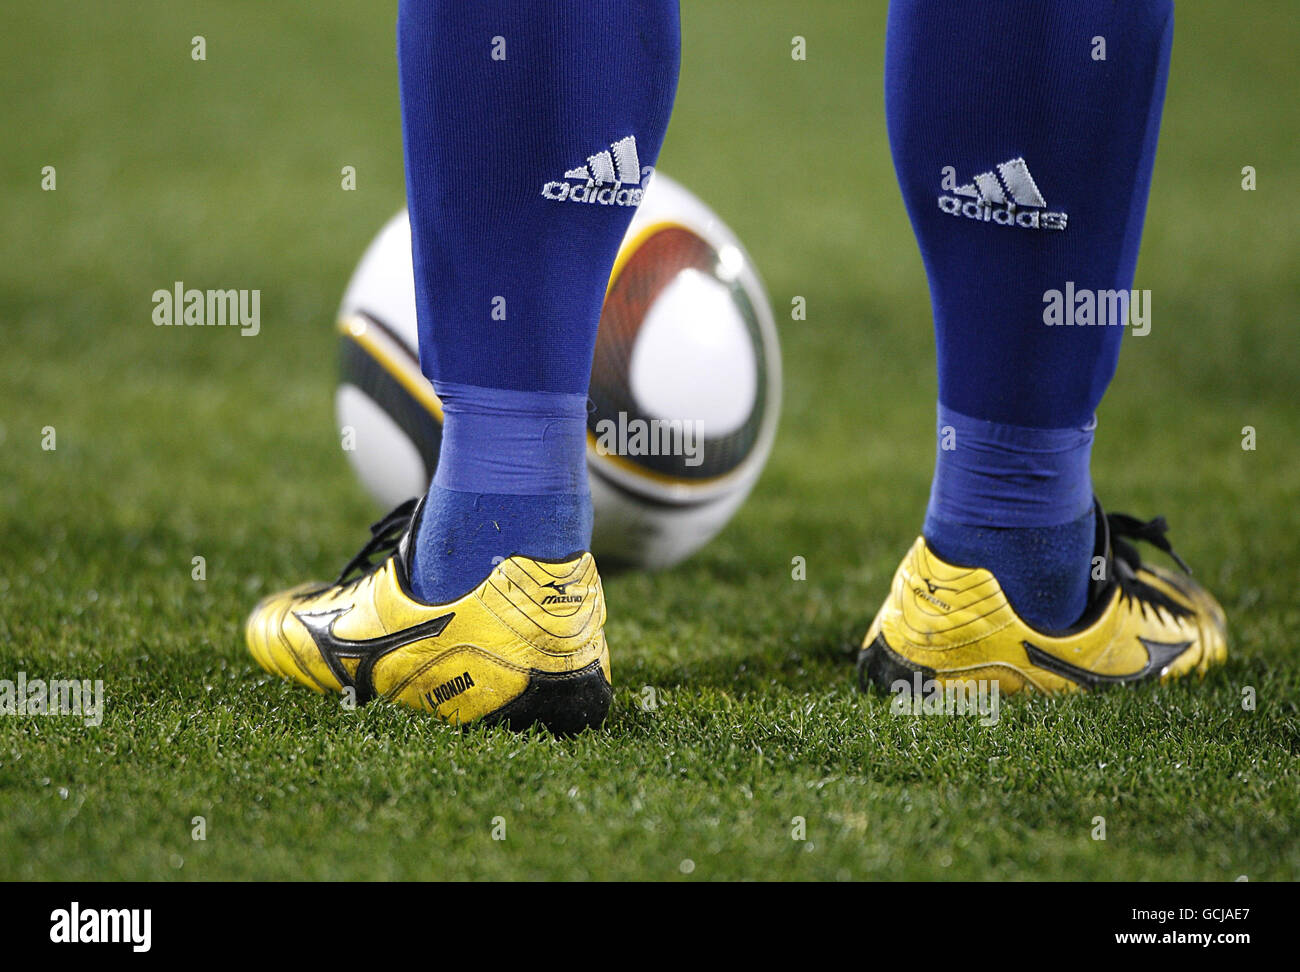 General view of a Japan player with yellow football boots with a Jabulani ball at his feet Stock Photo